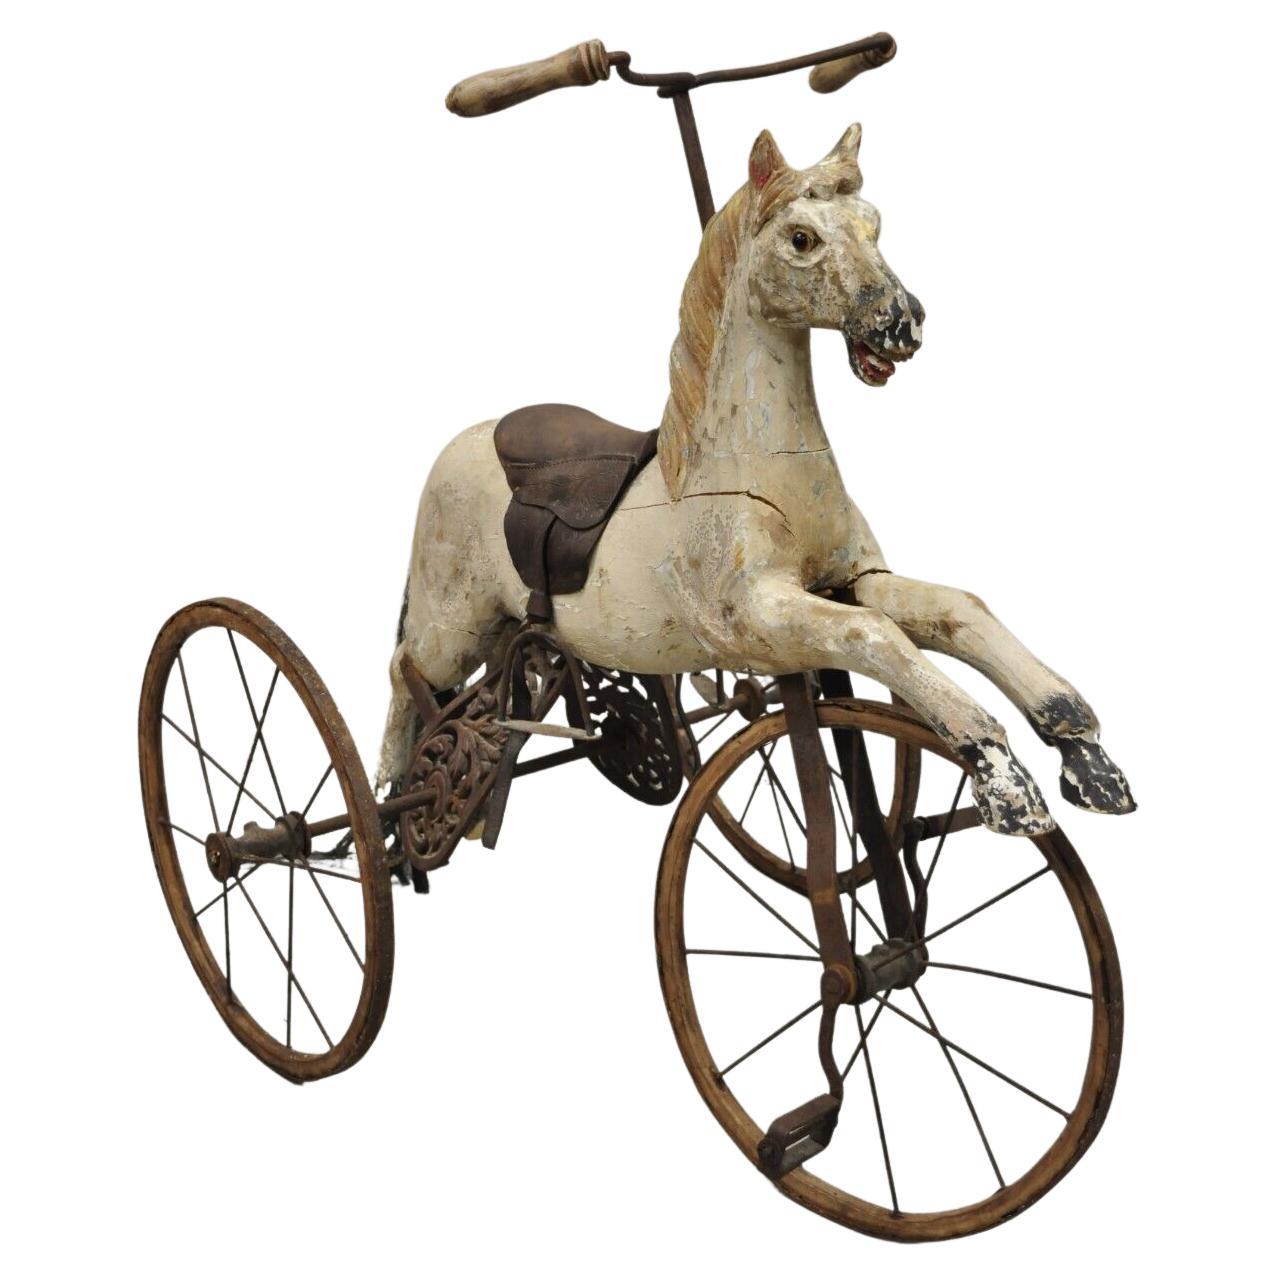 Vintage Carved Wood Hobby Horse Wooden Tricycle Bike Bicycle For Sale